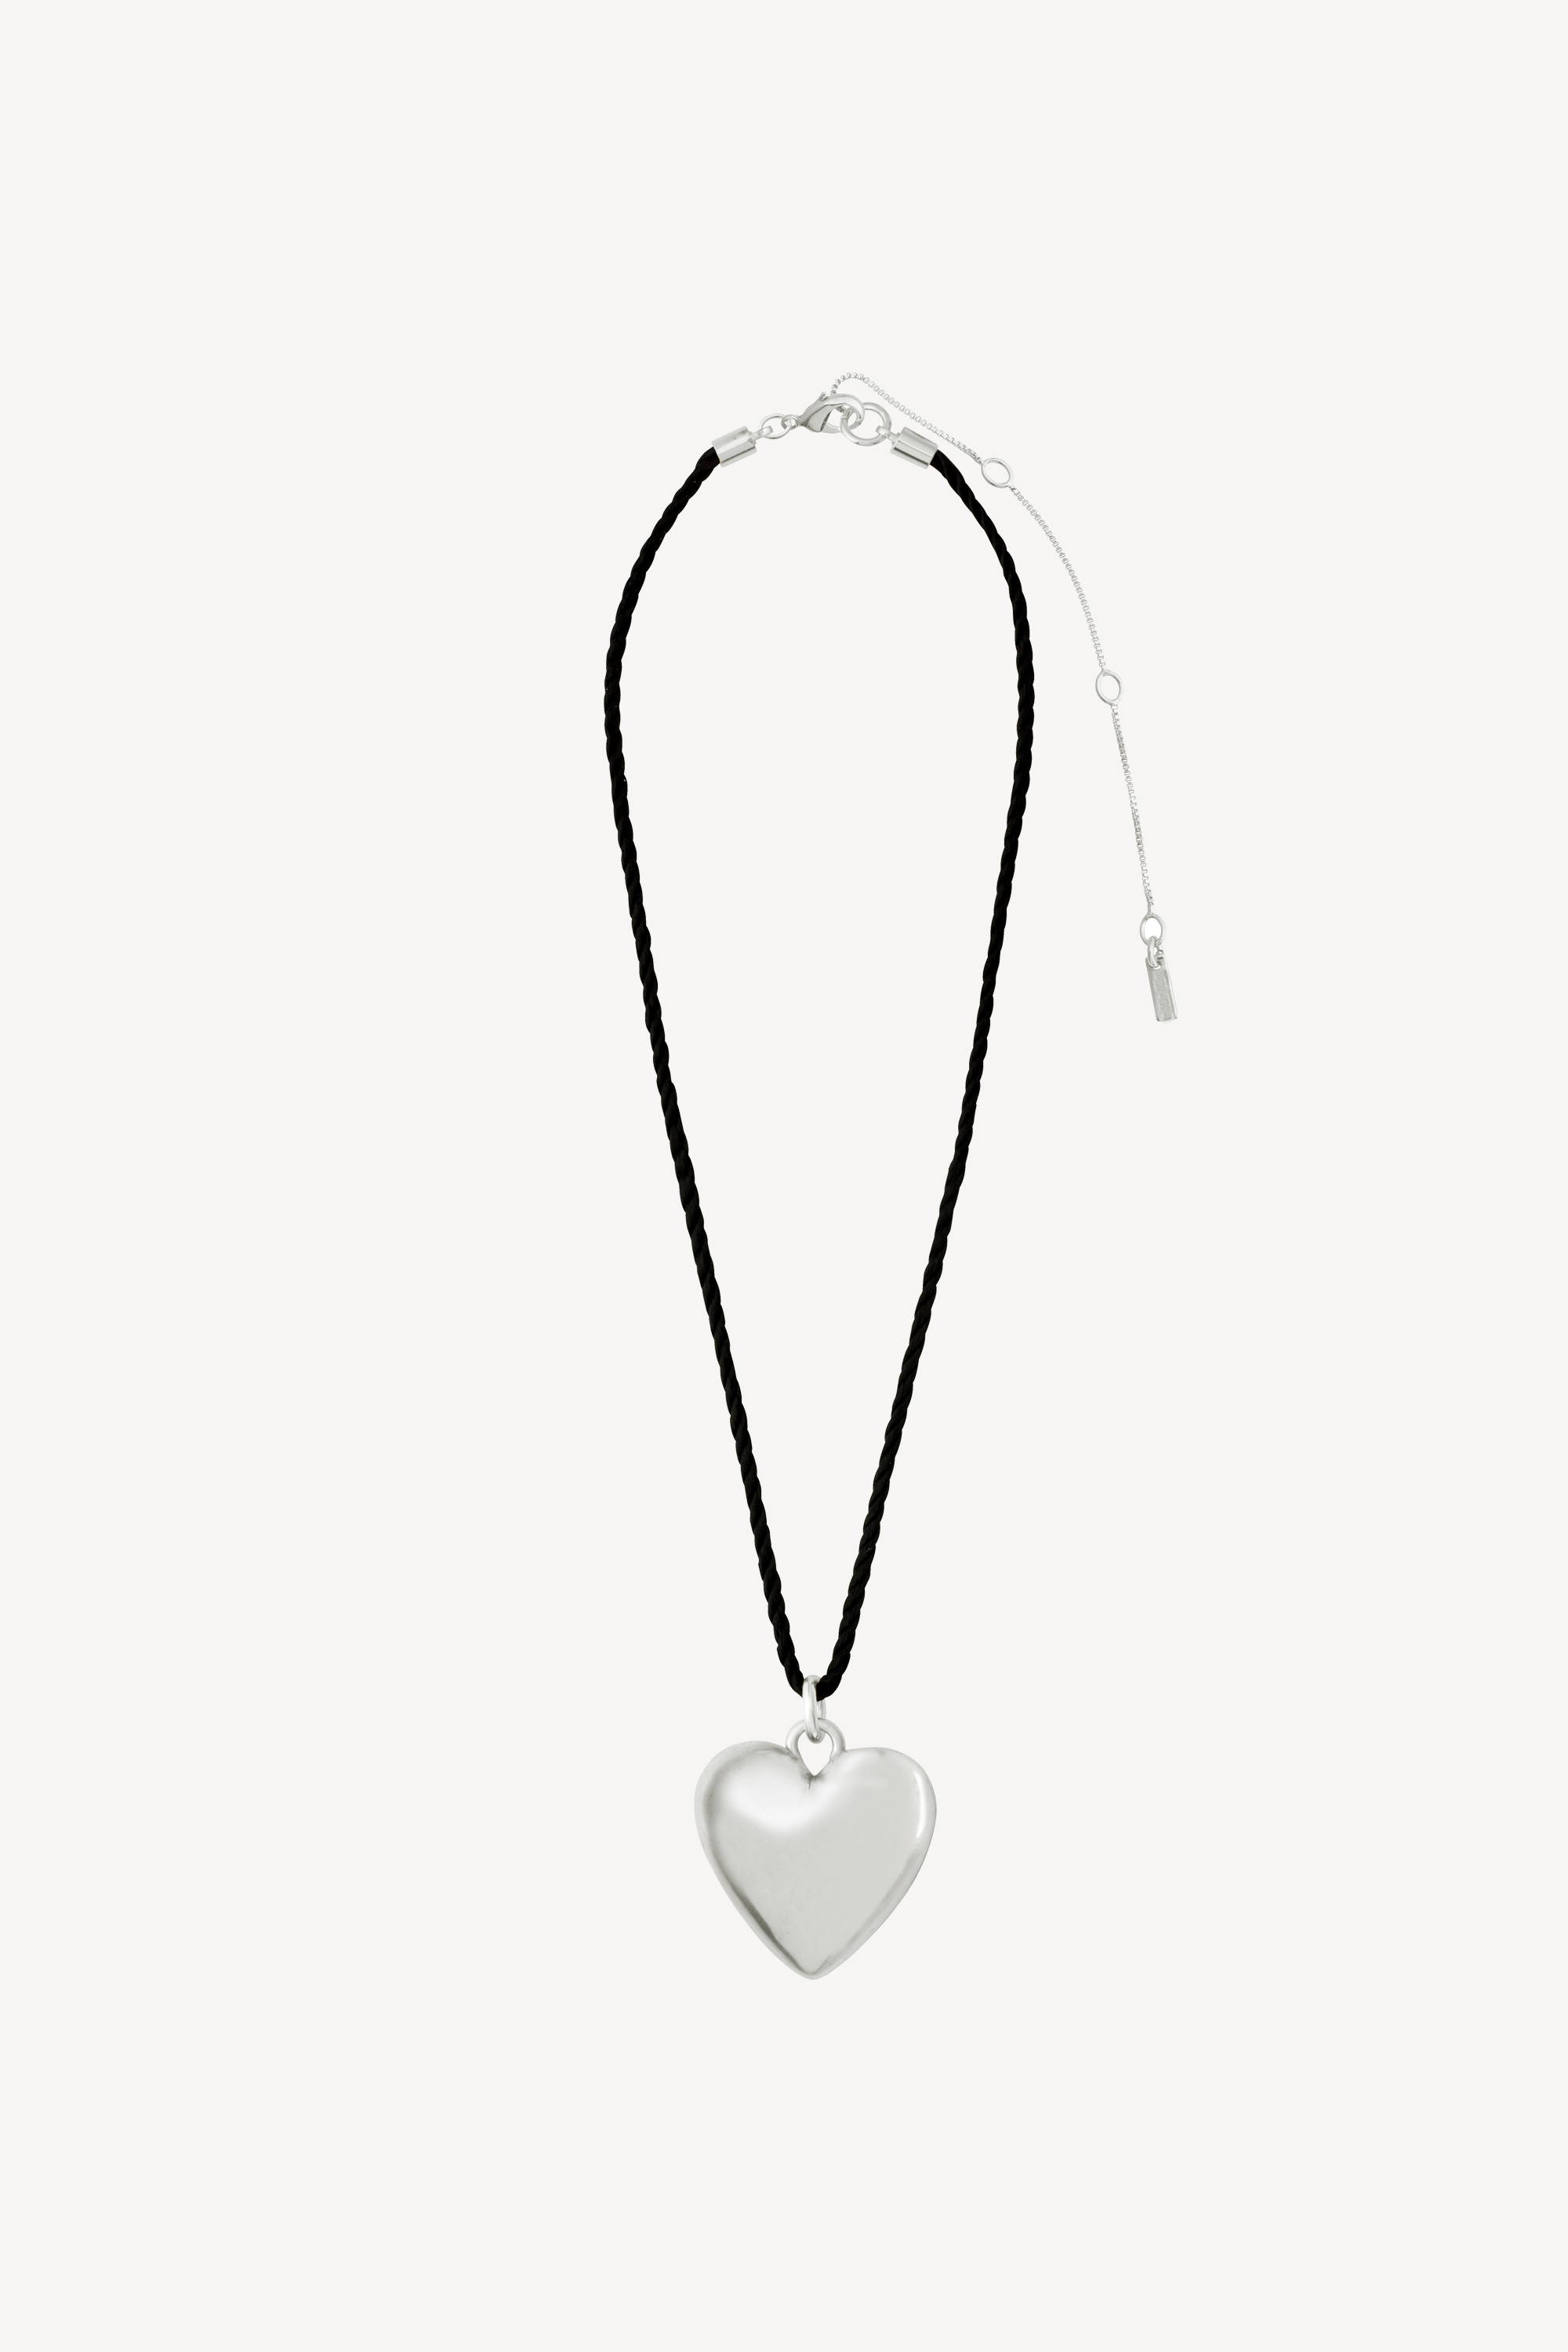 Reflect Heart Necklace Silver